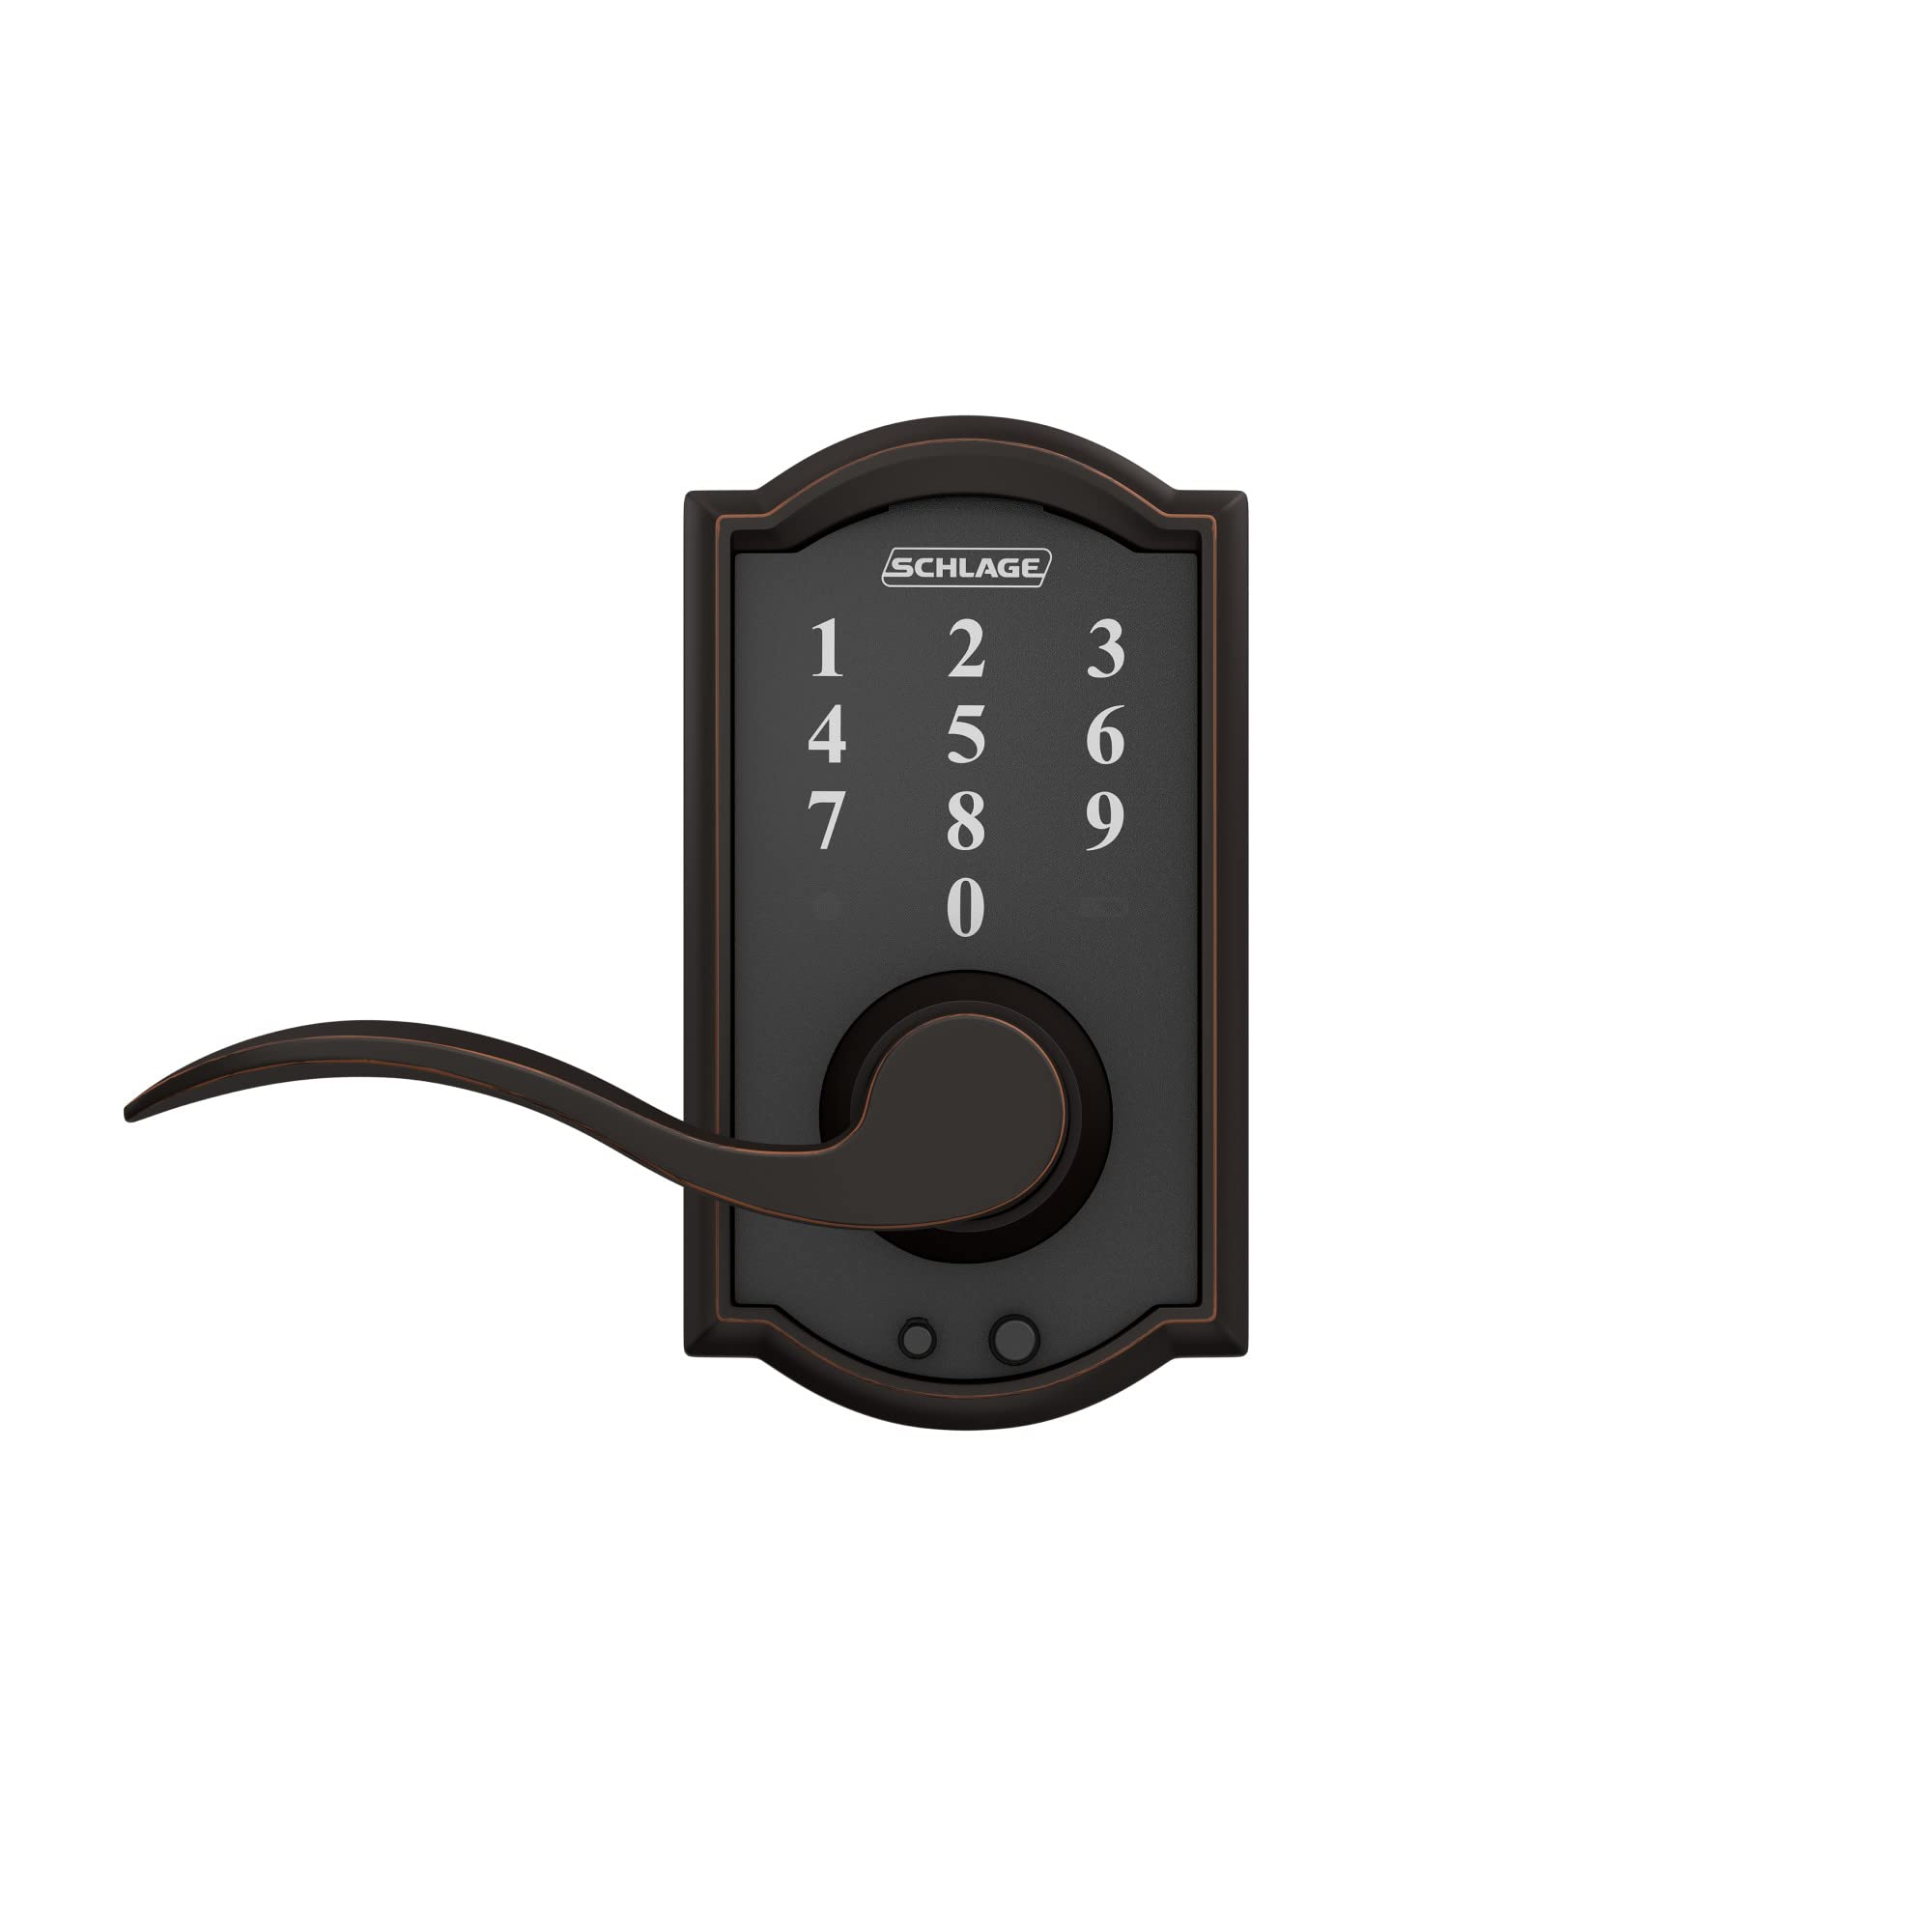 Schlage FE695 CAM 716 ACC Touch Camelot Lock with Accent Lever, Electronic Keyless Entry Lock, Aged Bronze